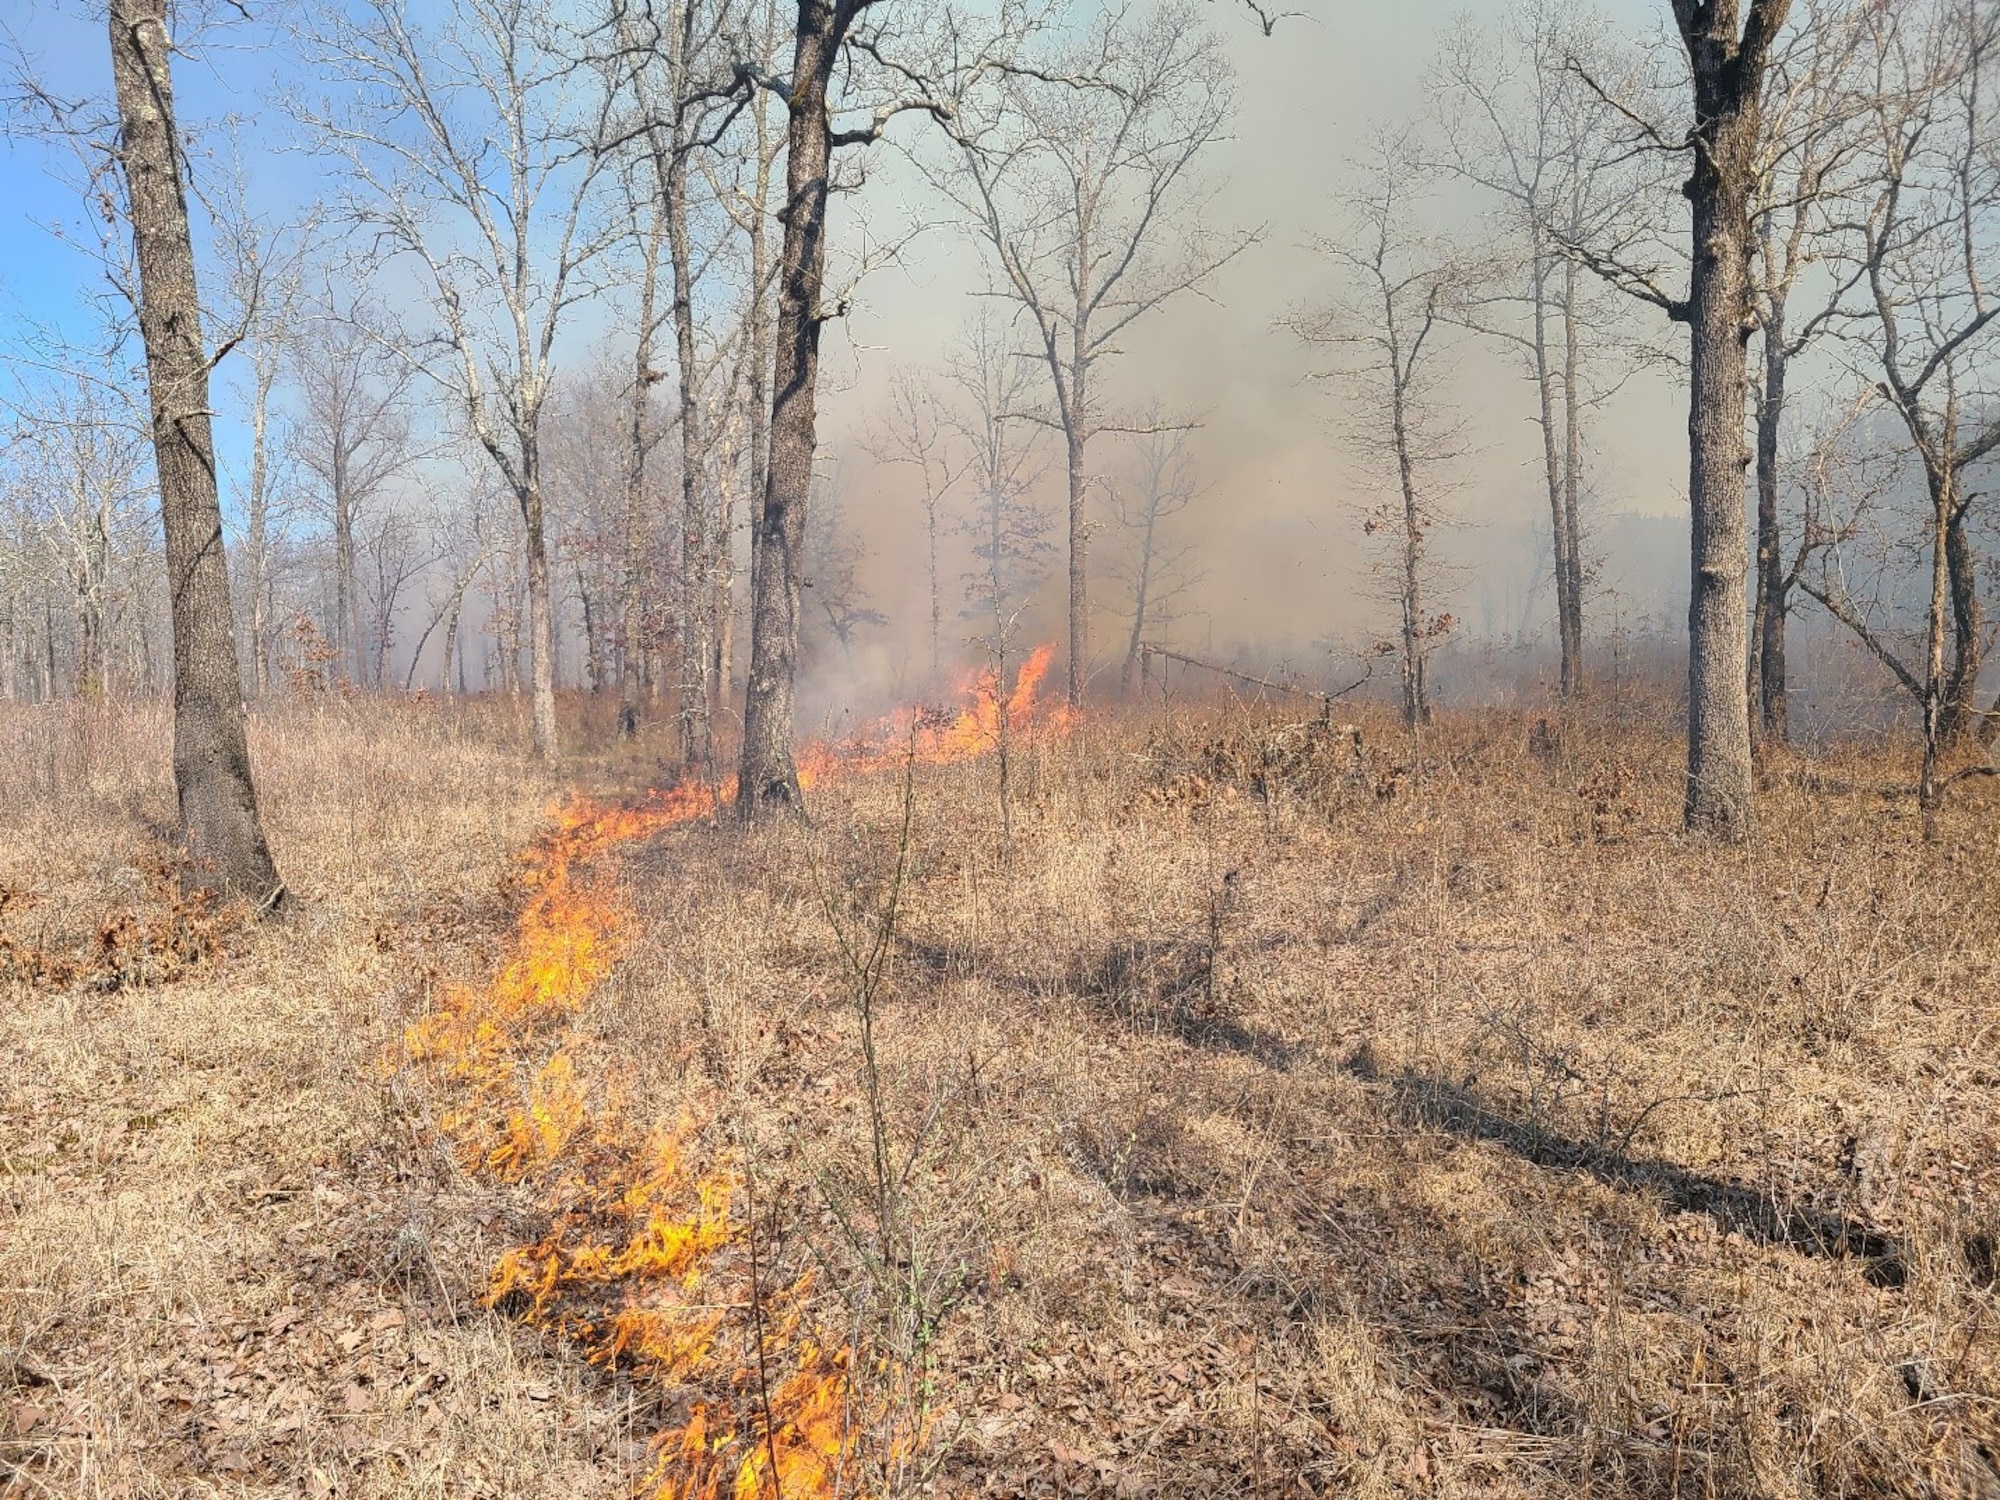 Pictured is a prescribed fire, or controlled burn, at Arnold Air Force Base.